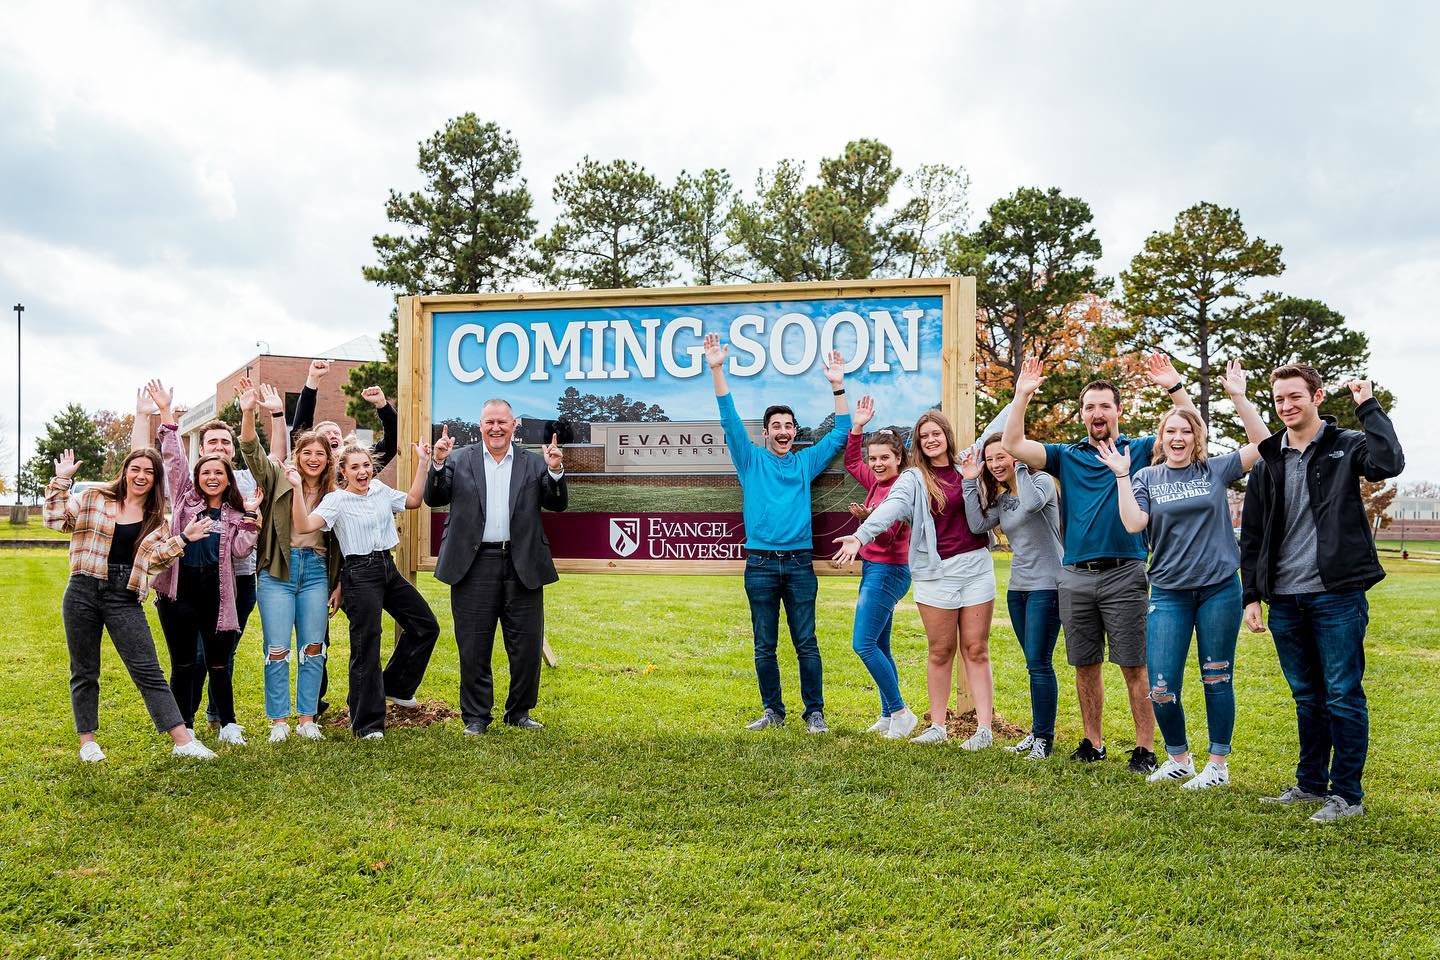 Evangel President Mike Rakes and students tease projects coming soon to the university.